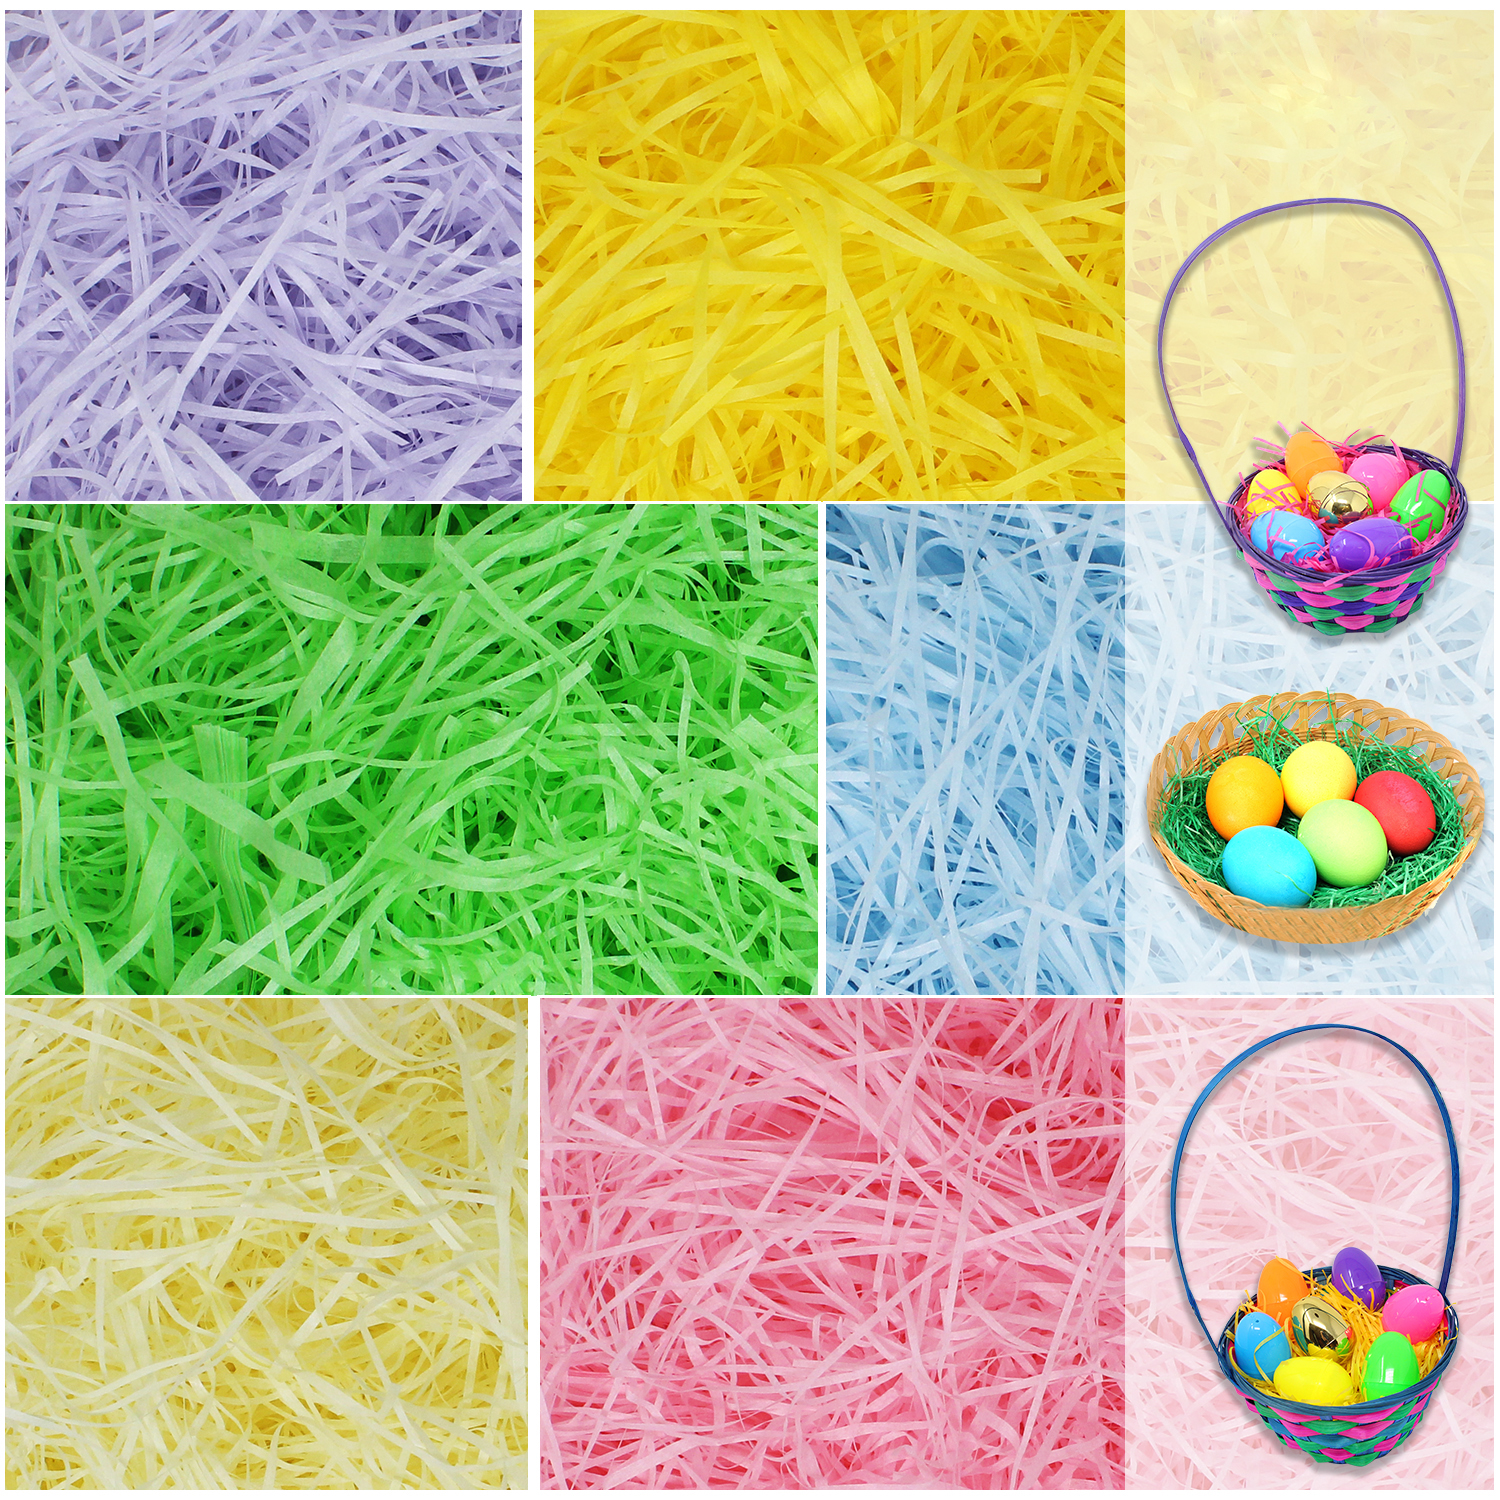 JOYIN Recyclable Shred Paper Grass 24oz (680g) 6 Colors Easter Basket Filler Stuffers for Easter Egg Hunt Dcor, Party Favors, Classroom Event